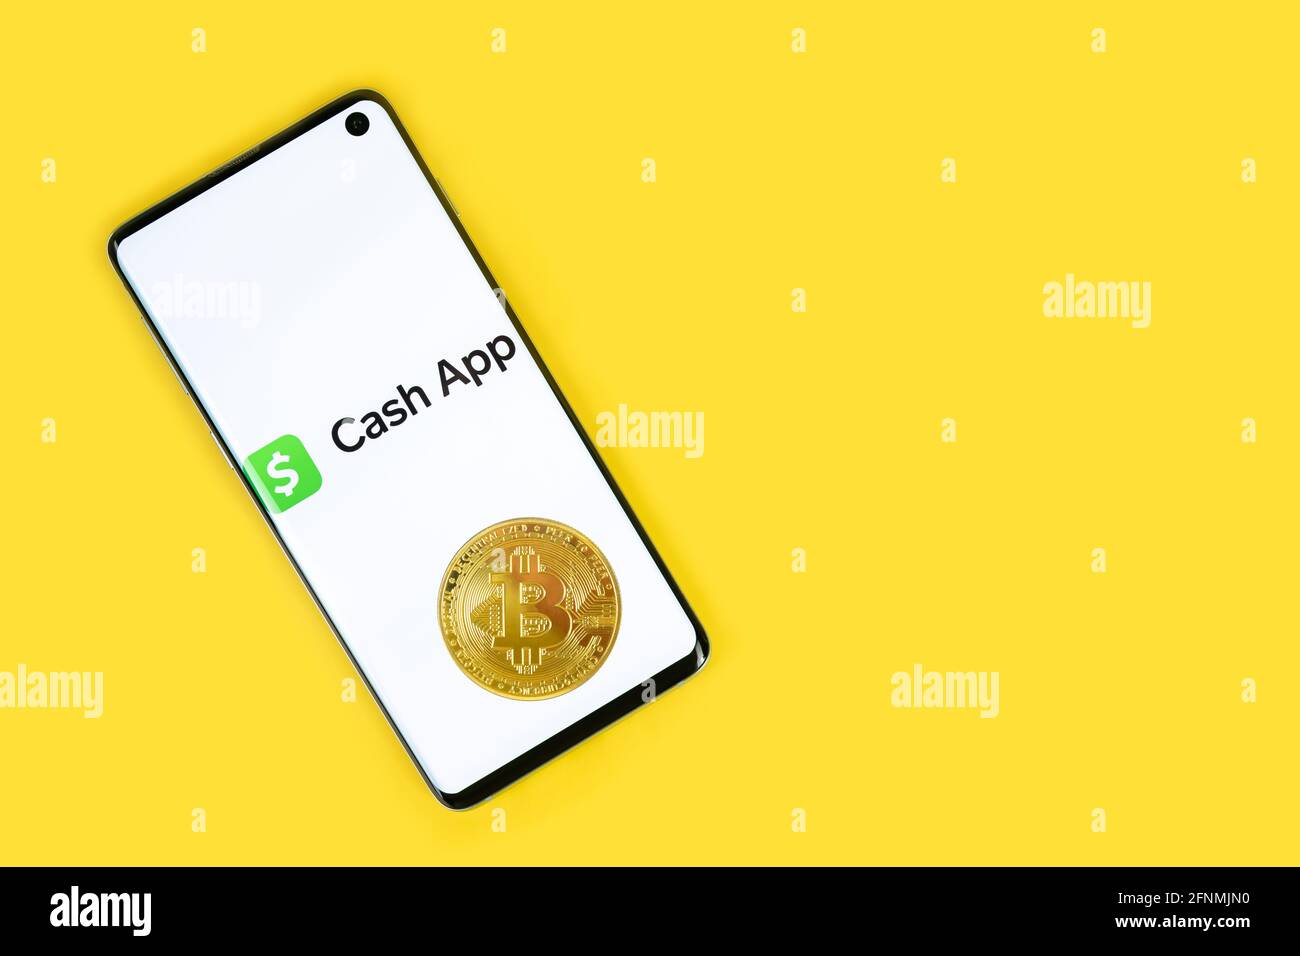 SWANSEA, UK - MAY 4, 2021: Smartphone with Cash App logo with Bitcoin coin on yellow background. Mobile payment service, investing in cryptocurrencies Stock Photo